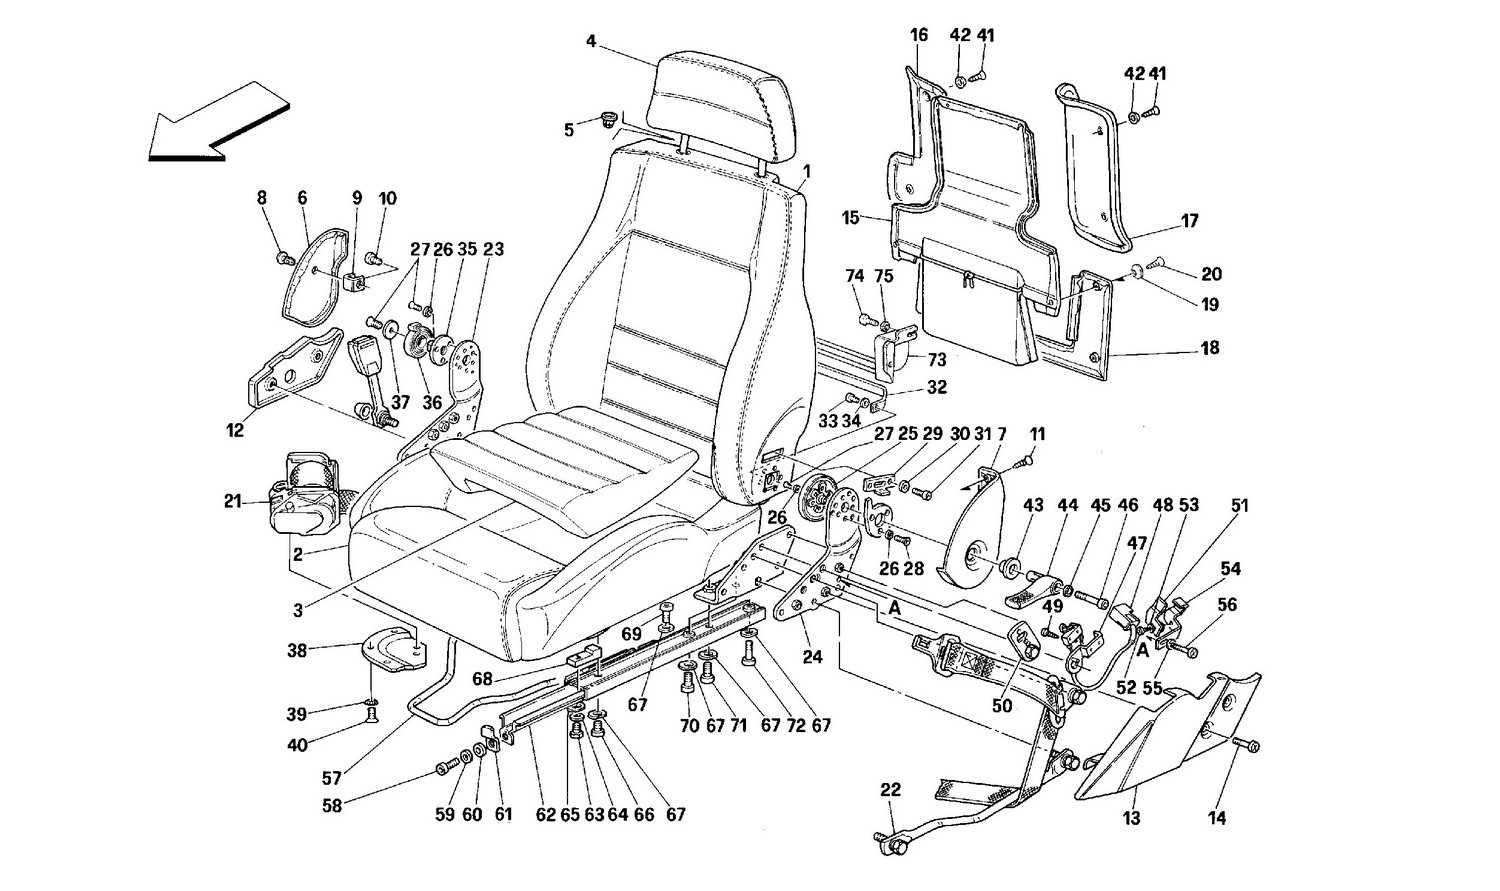 SEATS AND SAFETY BELTS -Valid for USA-